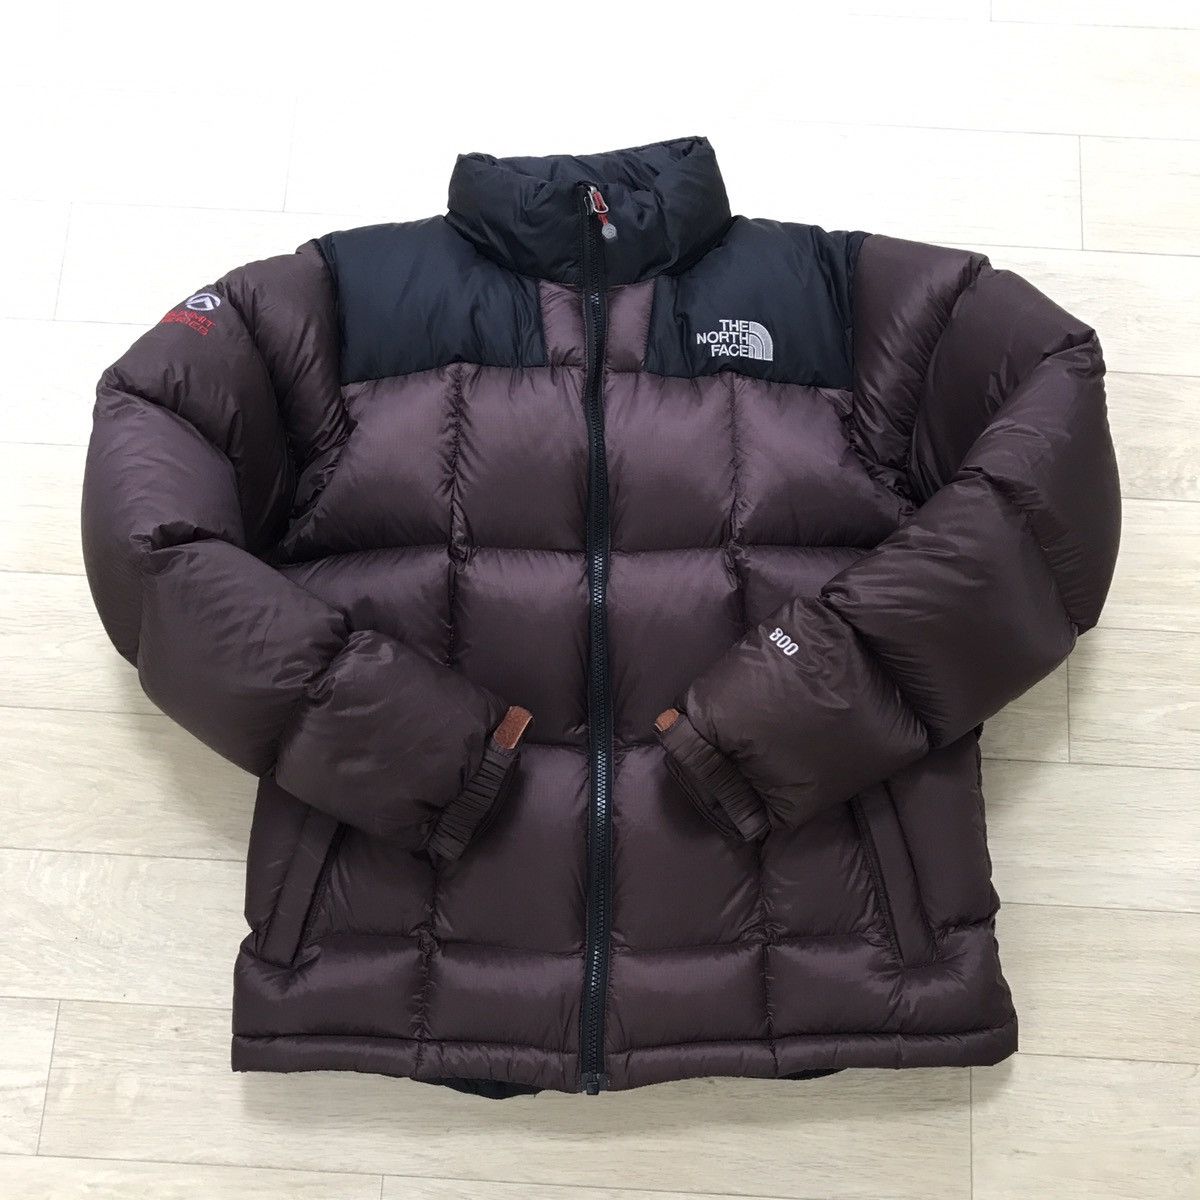 The North Face The North Face nuptse 800 puffer | Grailed